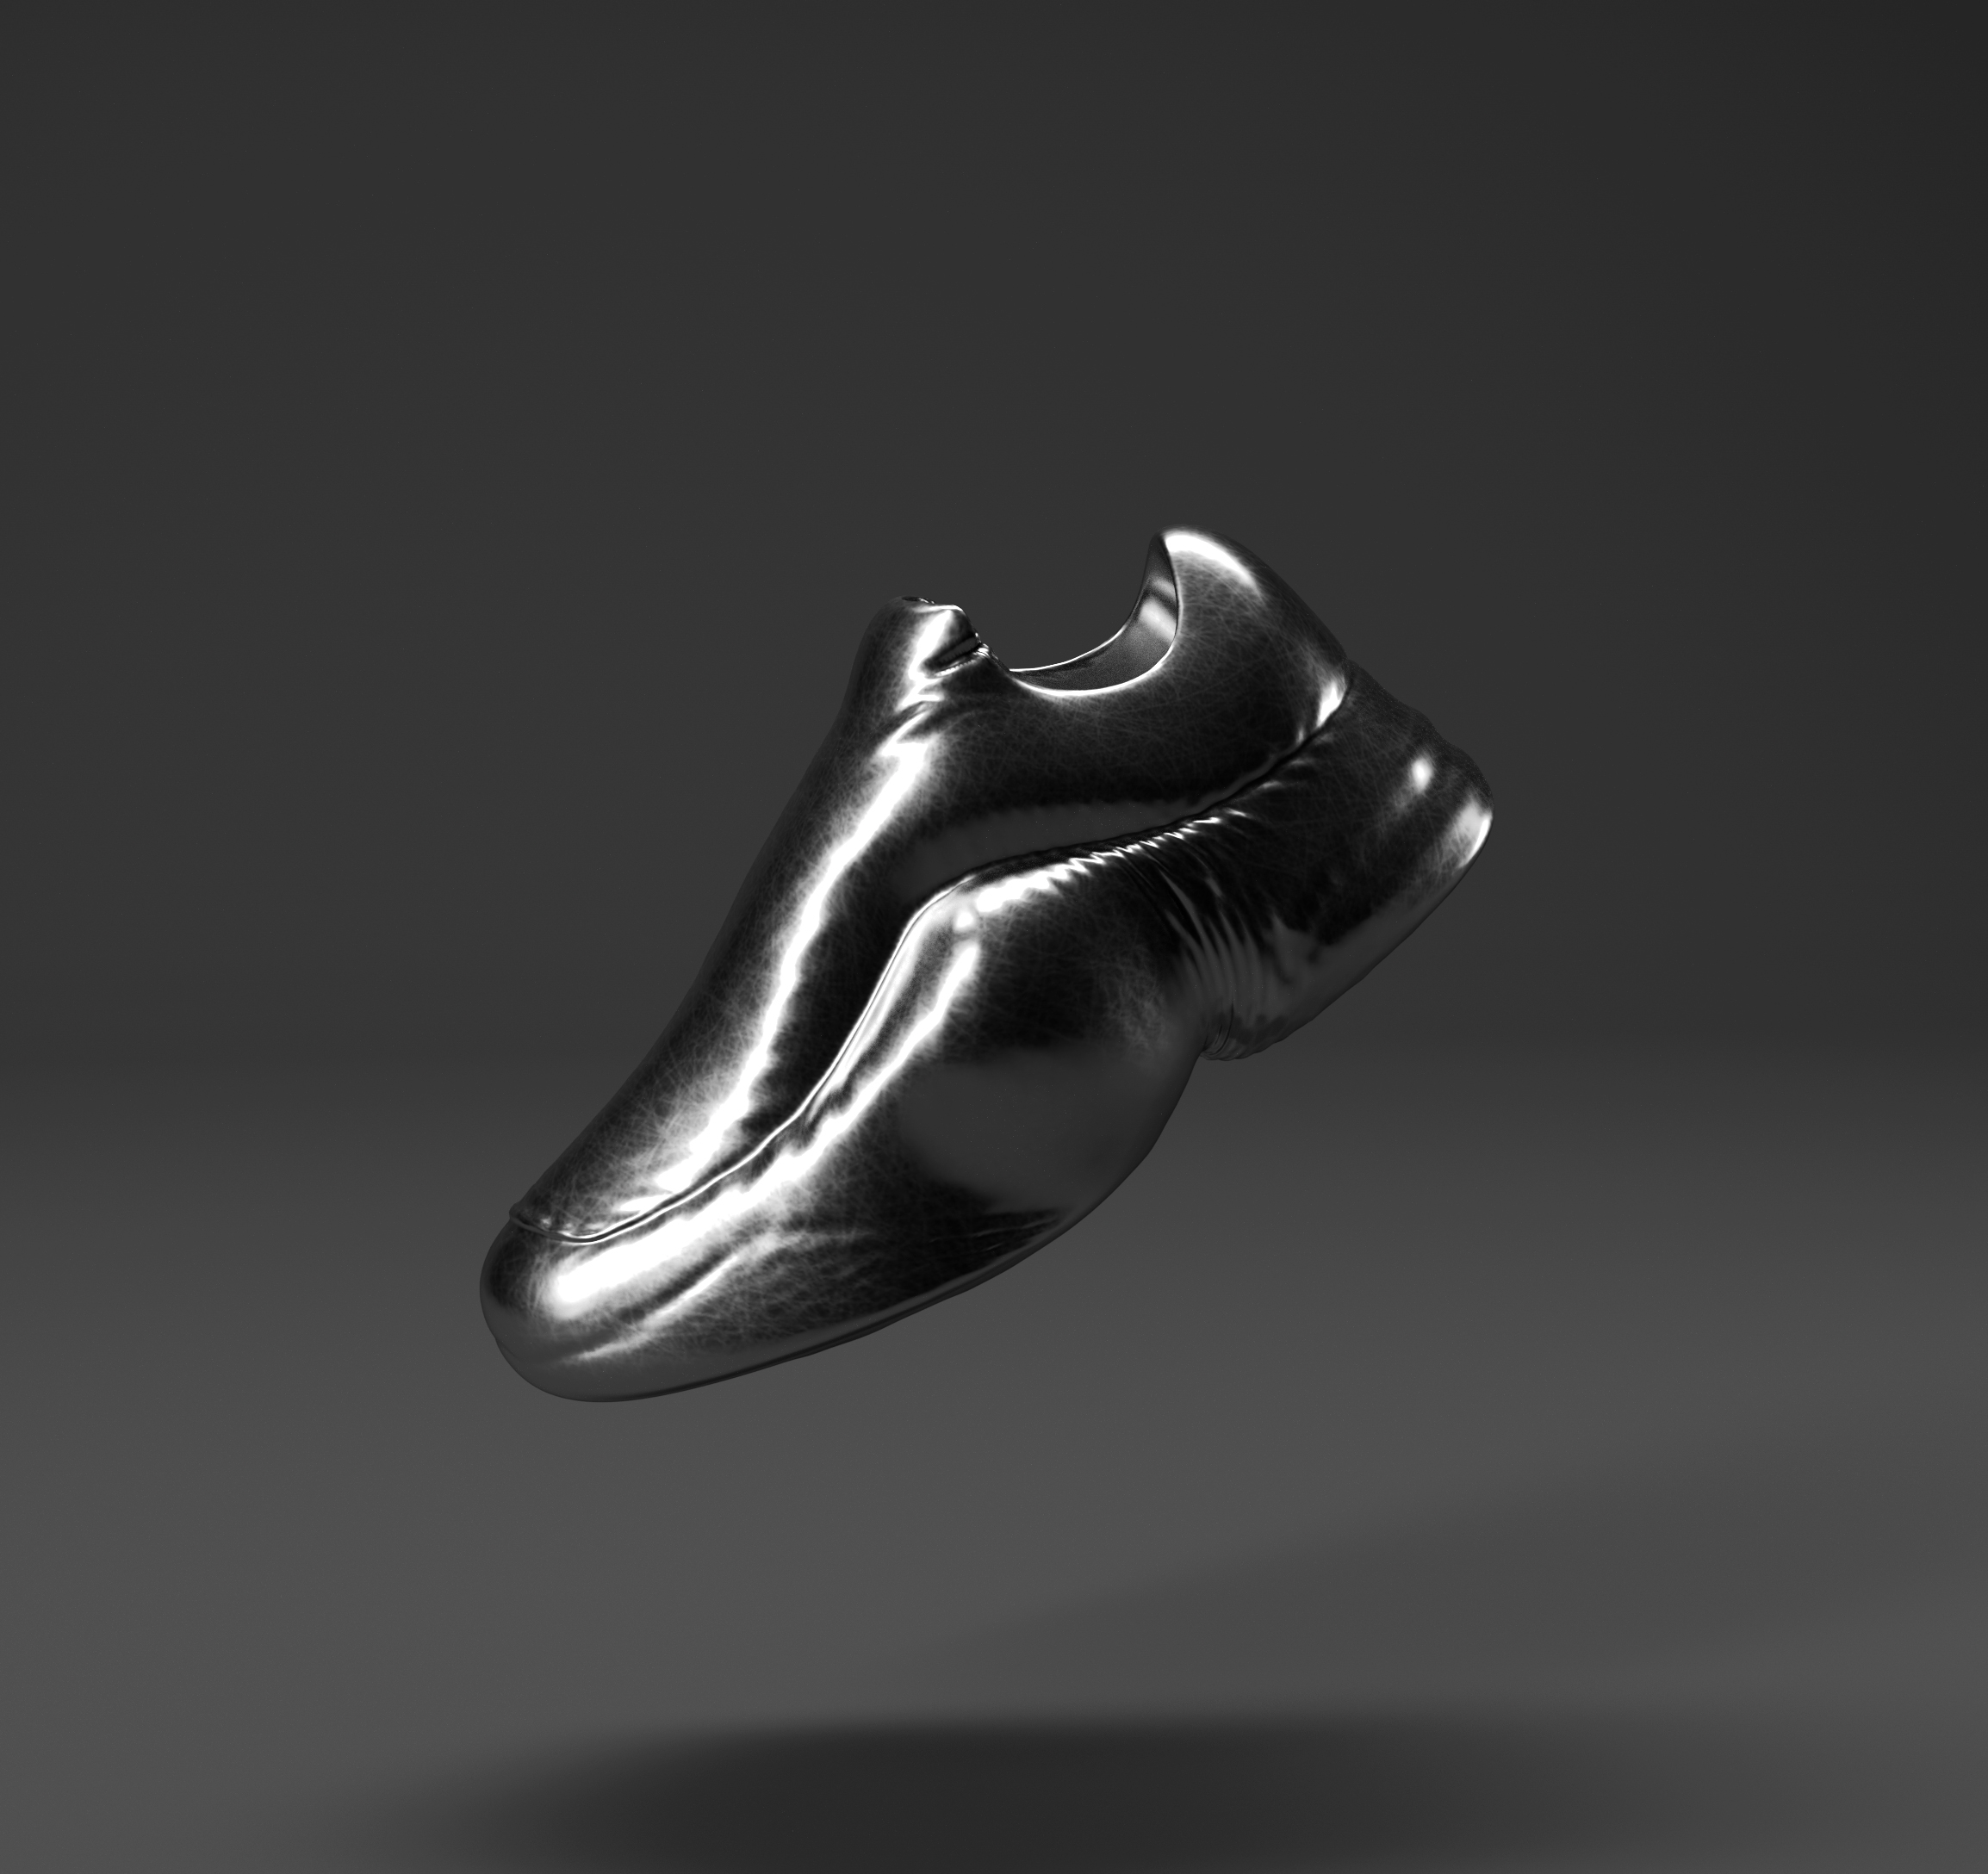 silver_SHOE STUDY-INFLATE1